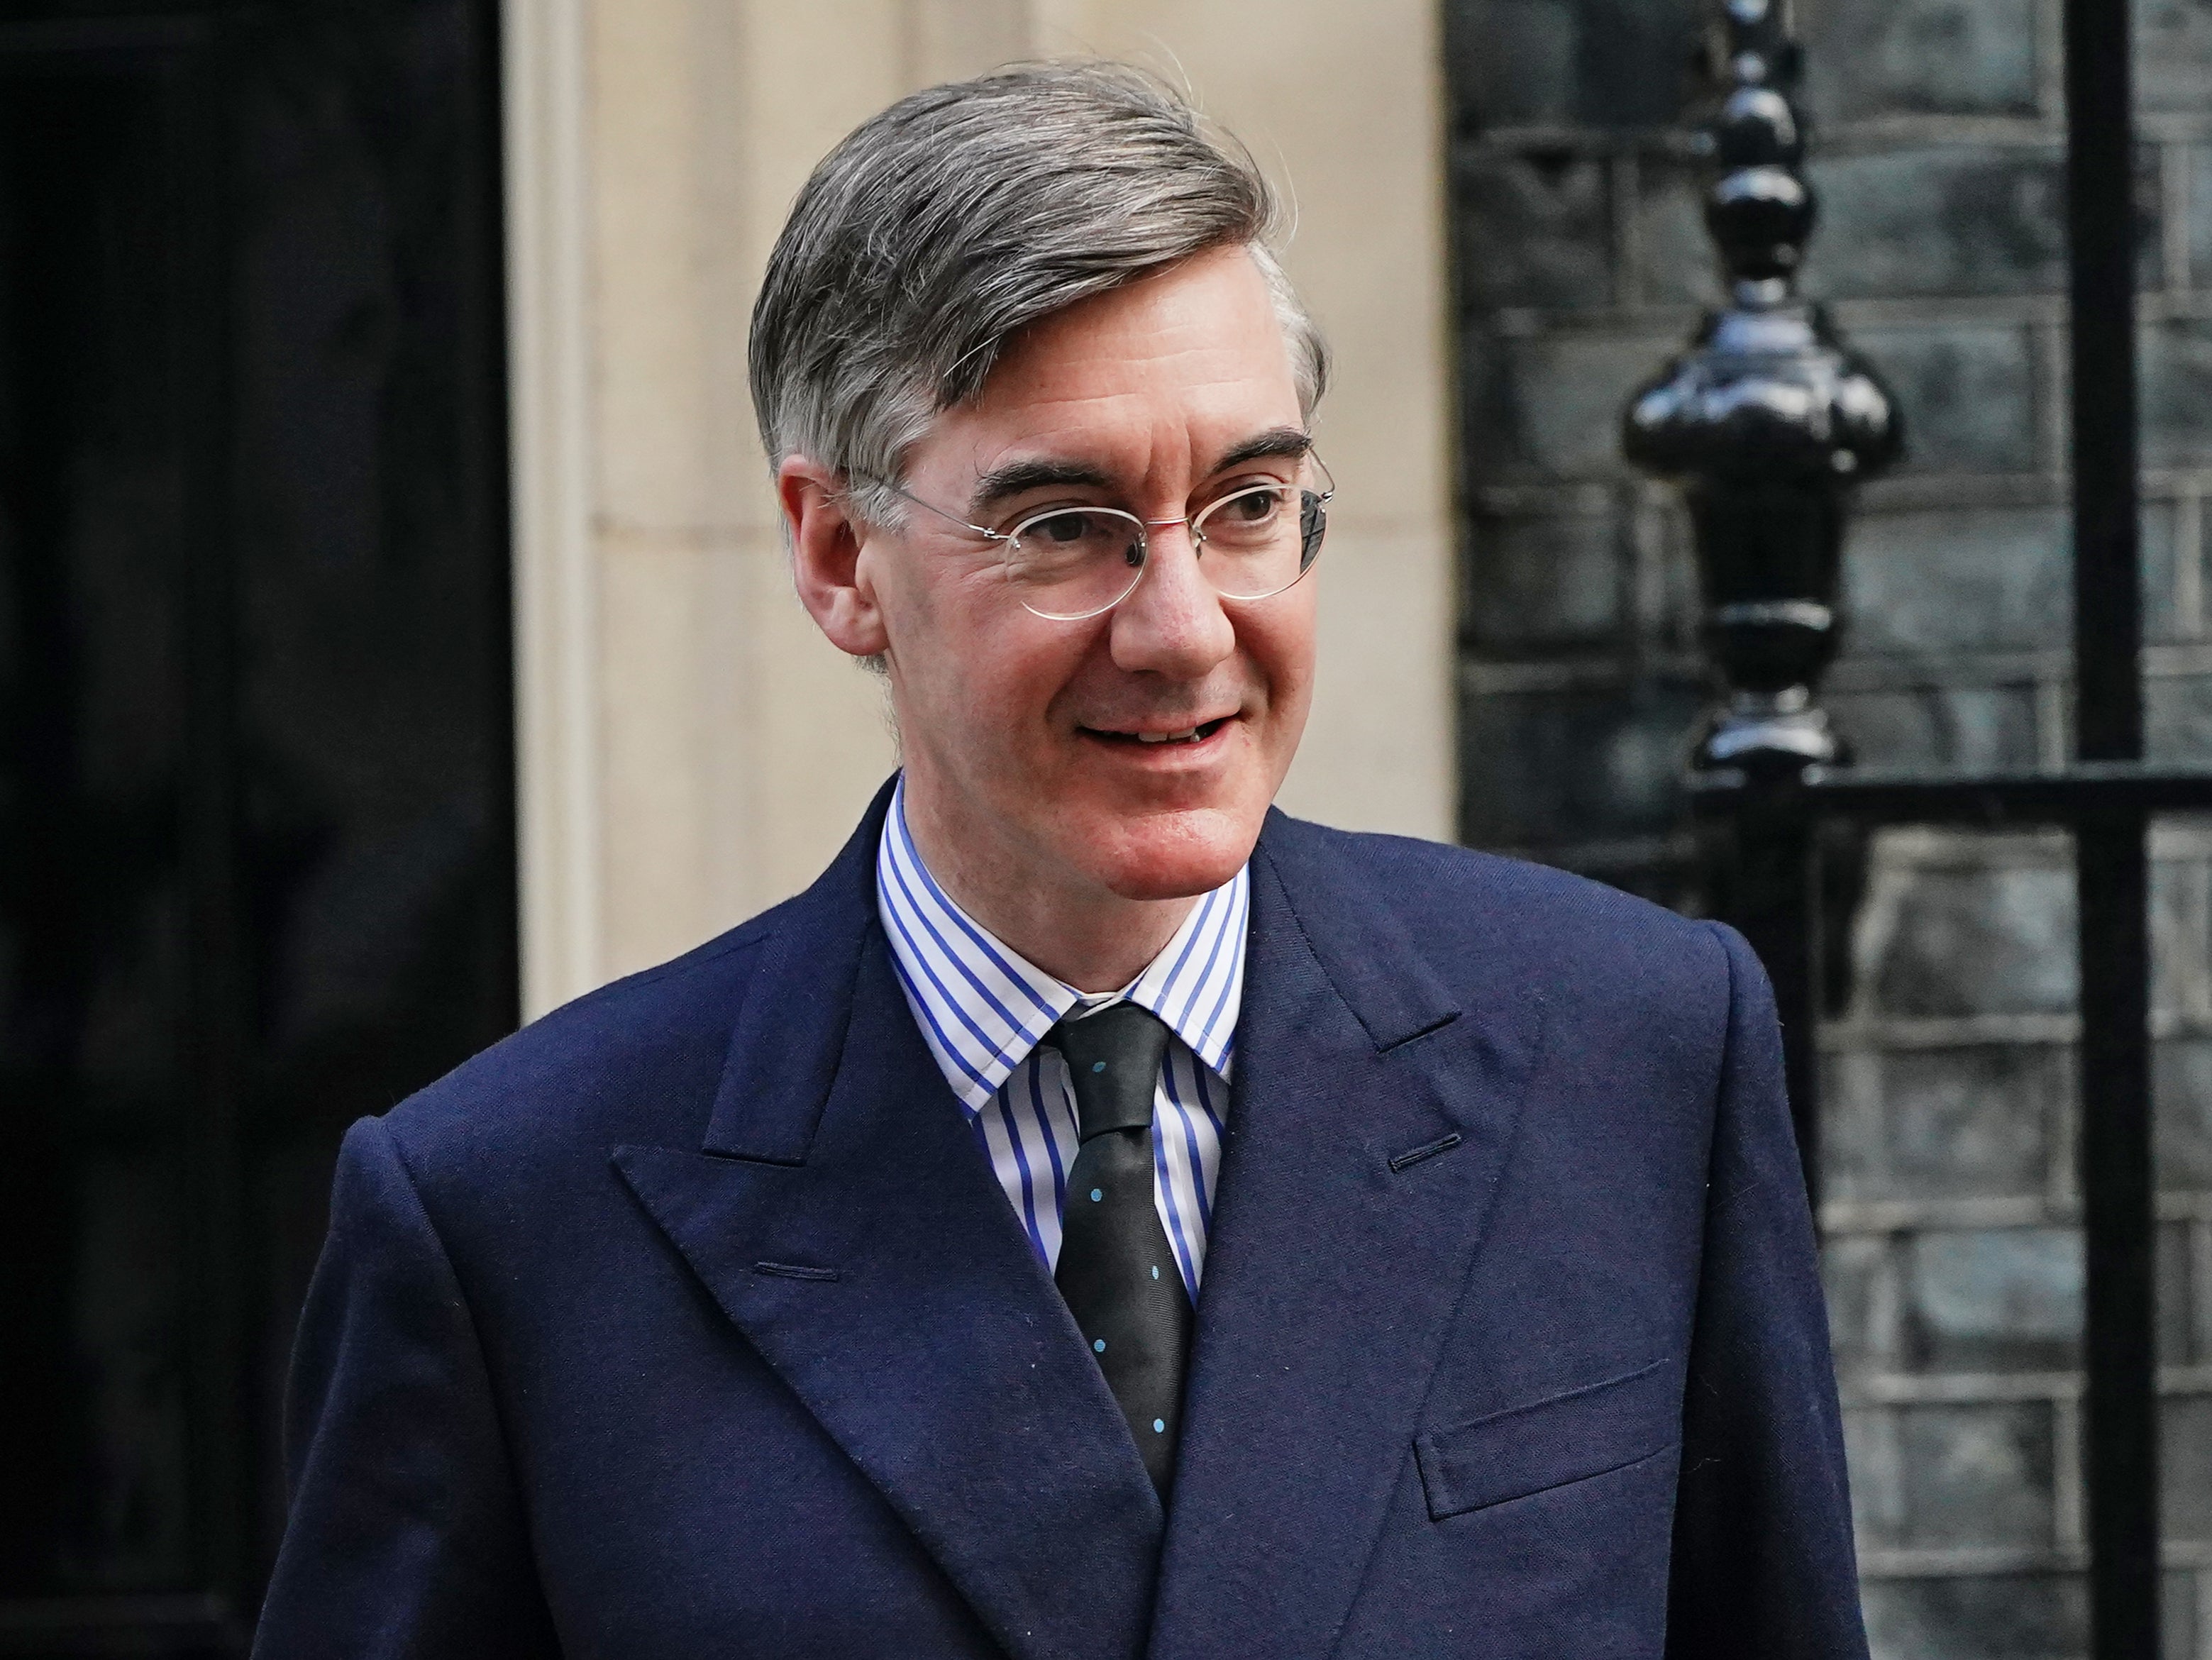 Brexit opportunities minister Jacob Rees-Mogg wants around 1,500 EU laws cut